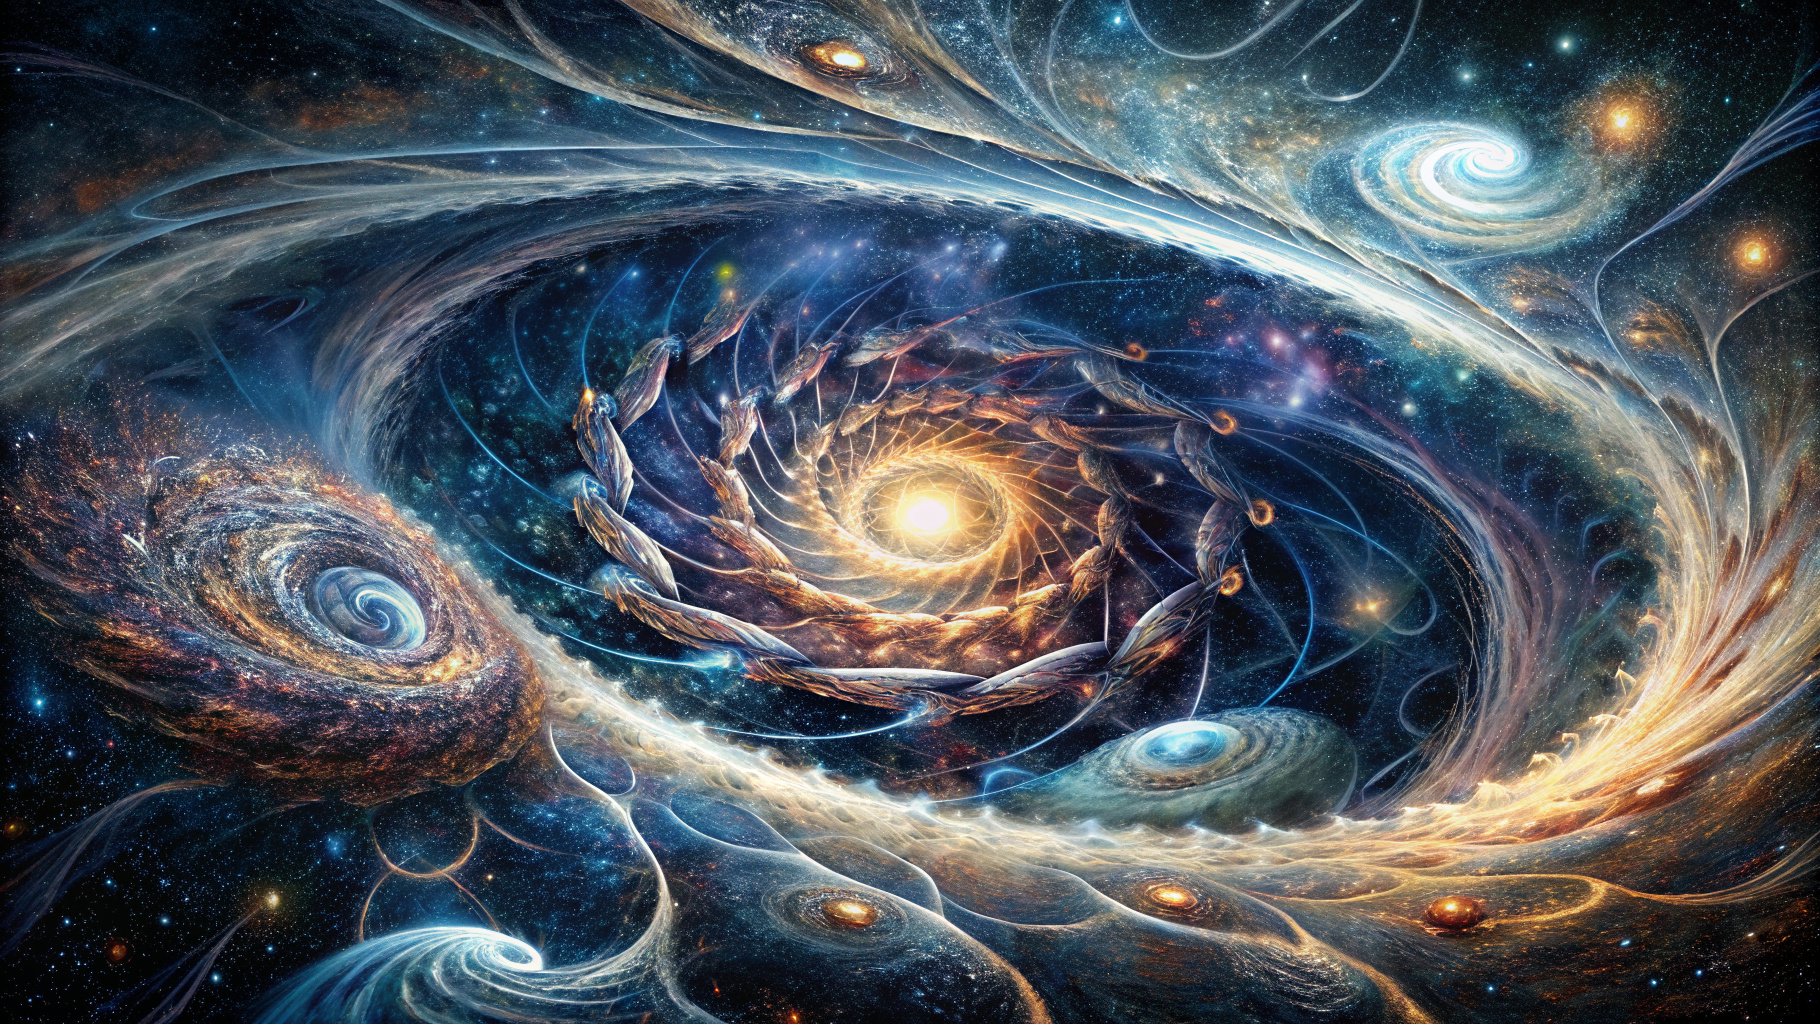 A cosmic weaver spinning galaxies and stars into intricate patterns, symbolizing the interconnectedness of creation.